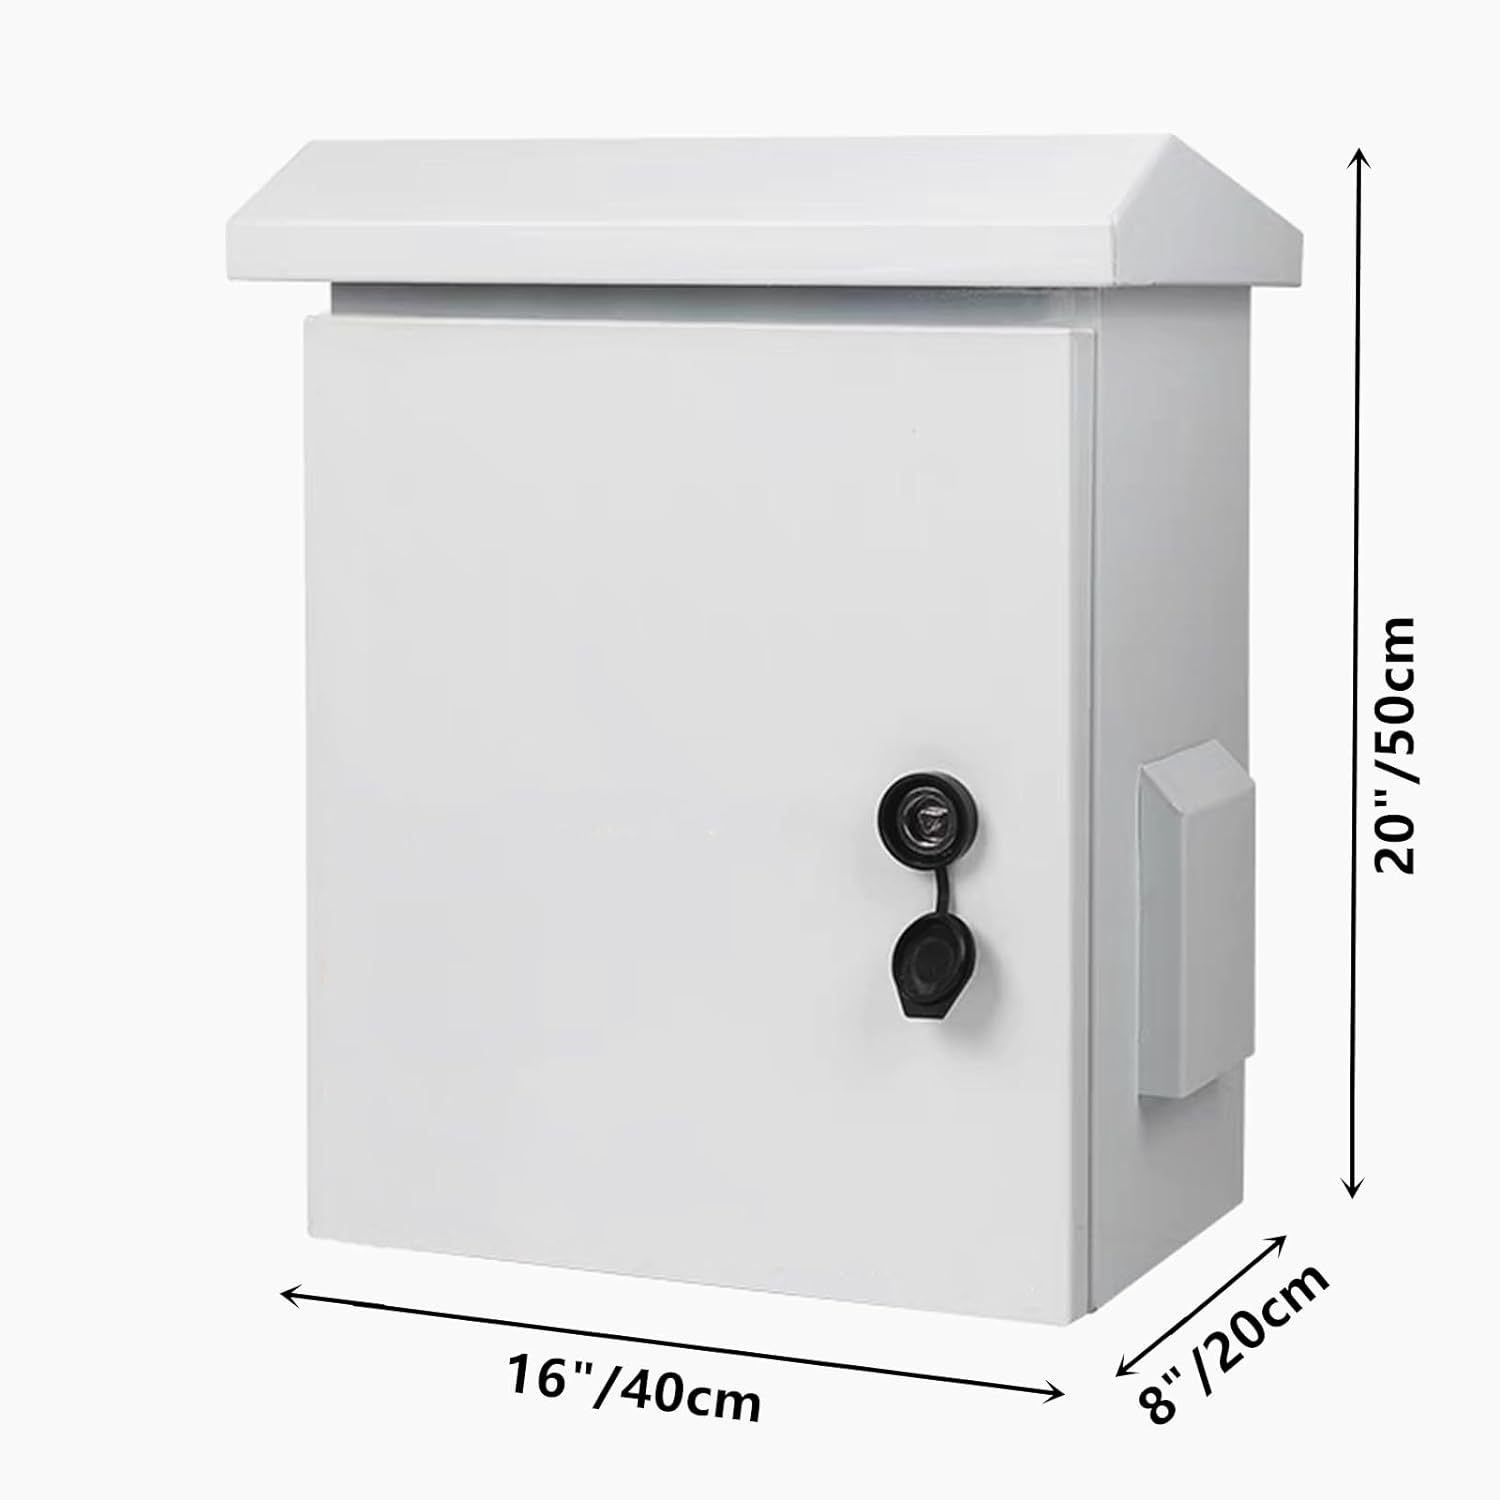 Outdoor Electrical Box One-Piece Ventilation Design Electrical Enclosure Box IP65 Waterproof Electrical Cabinet Street Light Box with Wall Hanging and Pole Mounting Parts